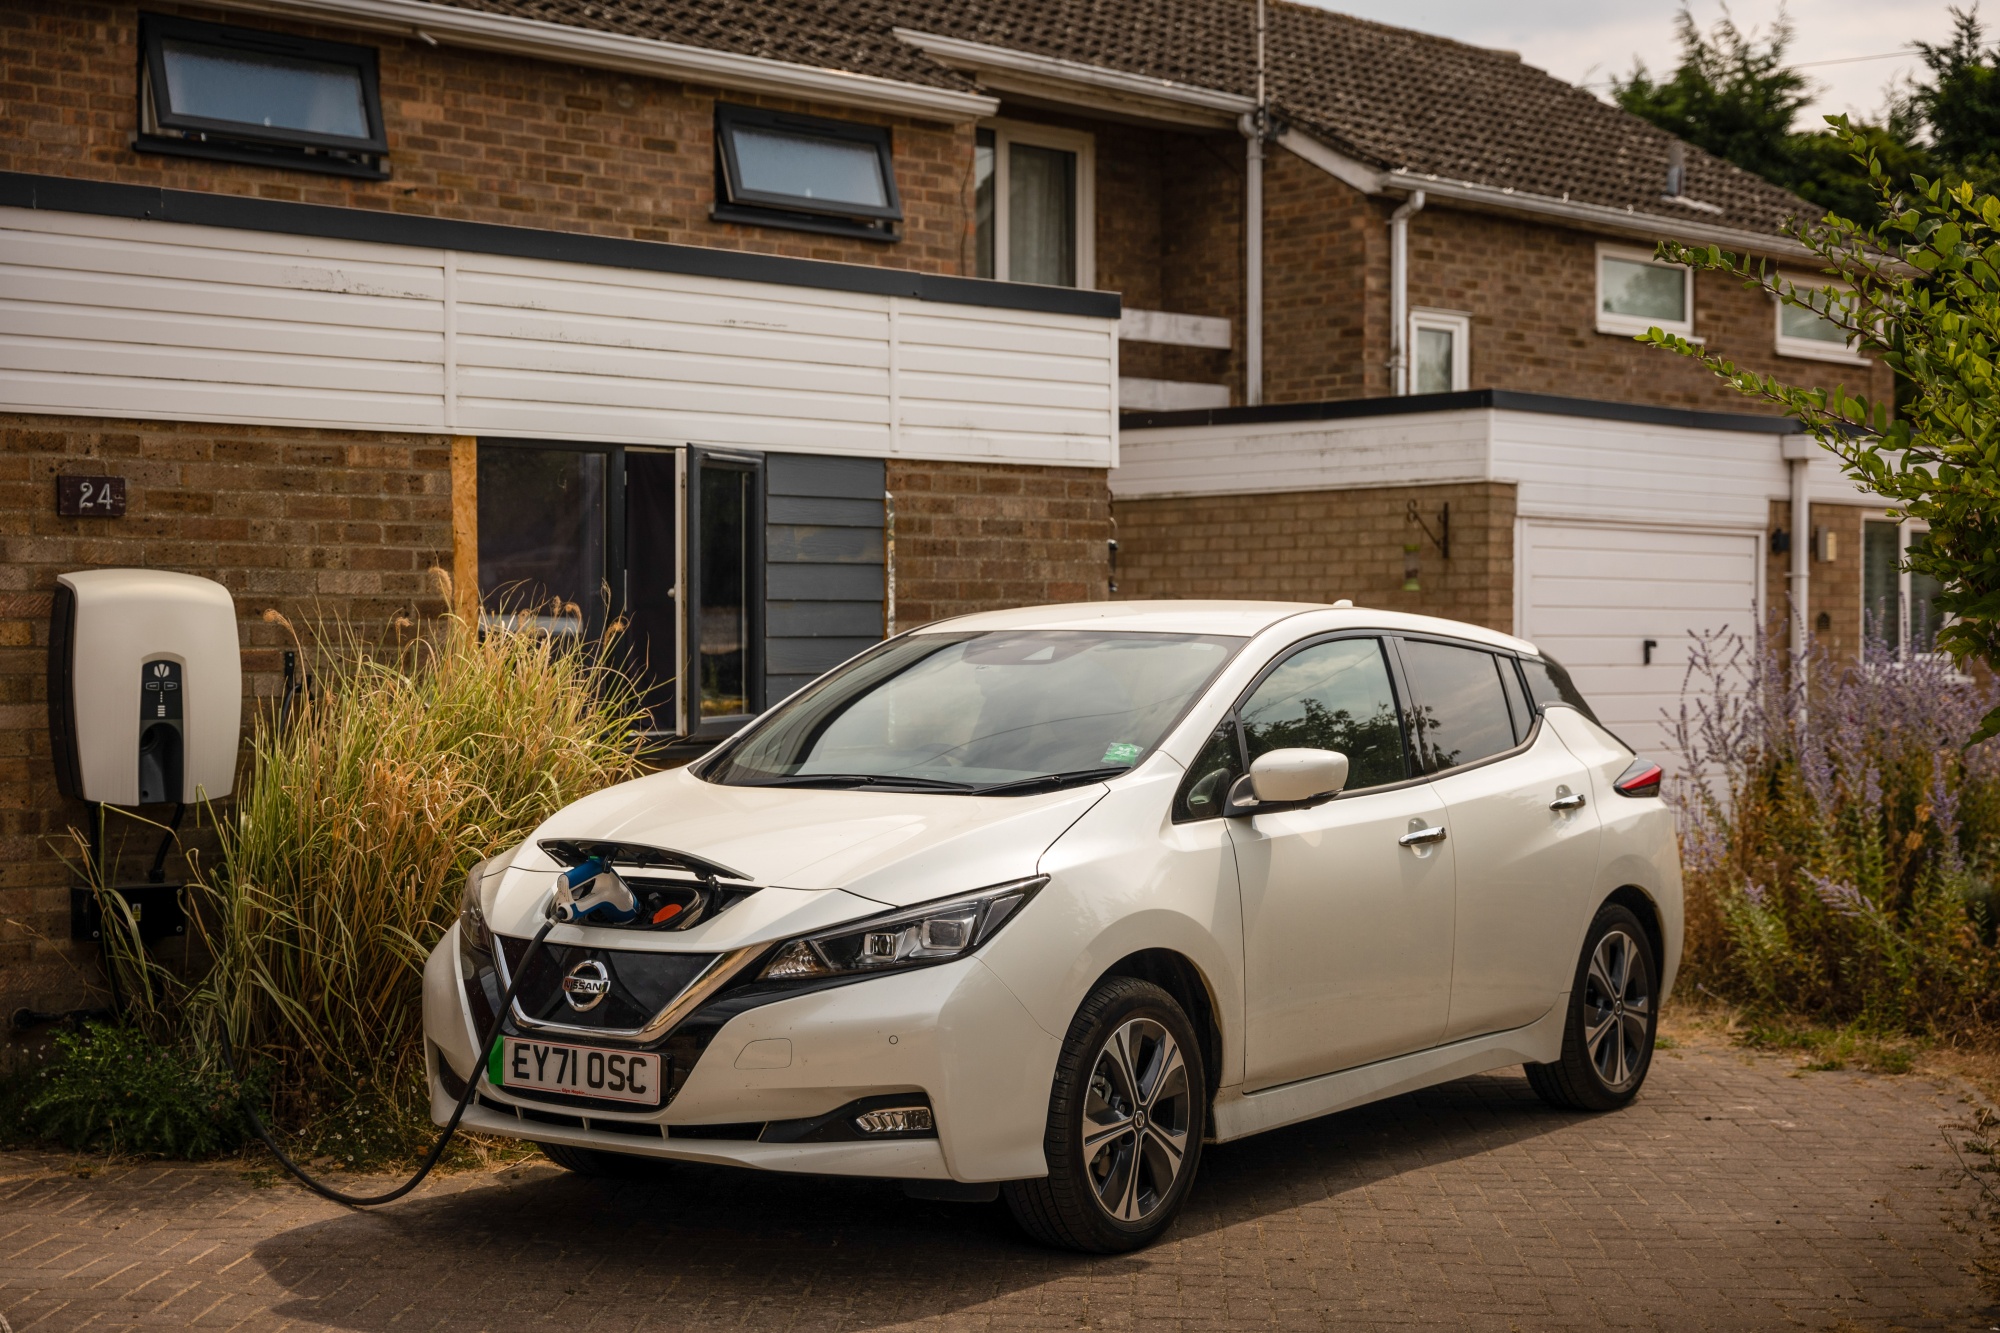 Paul Kershaw’s Nissan Leaf electric vehicle charging outside his home near&nbsp;Cambridge, UK, on&nbsp;Aug. 15.